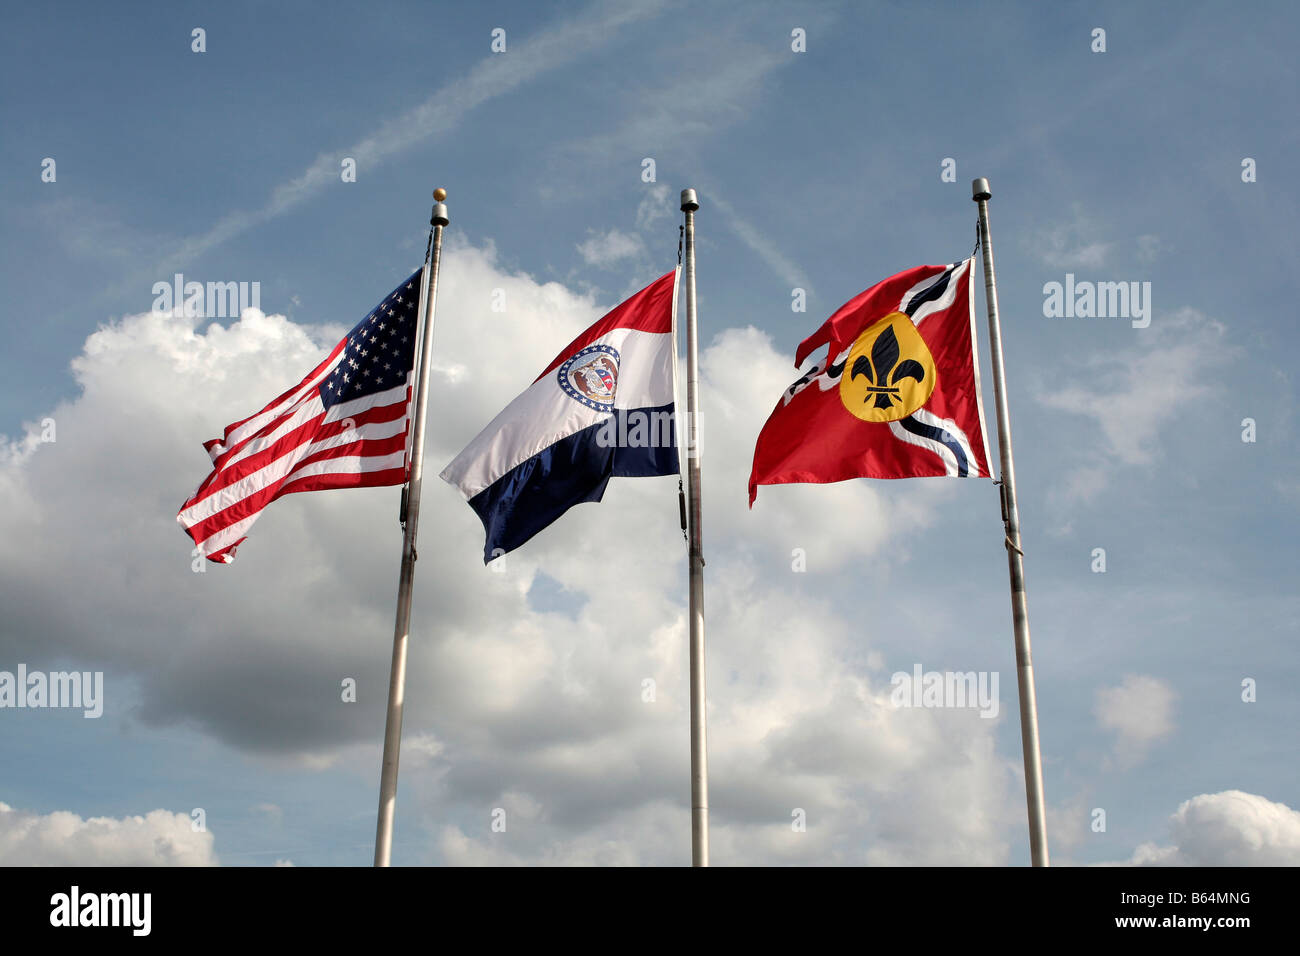 Three flags in on riverfront Gateway Arch St Louis Missouri Stock Photo